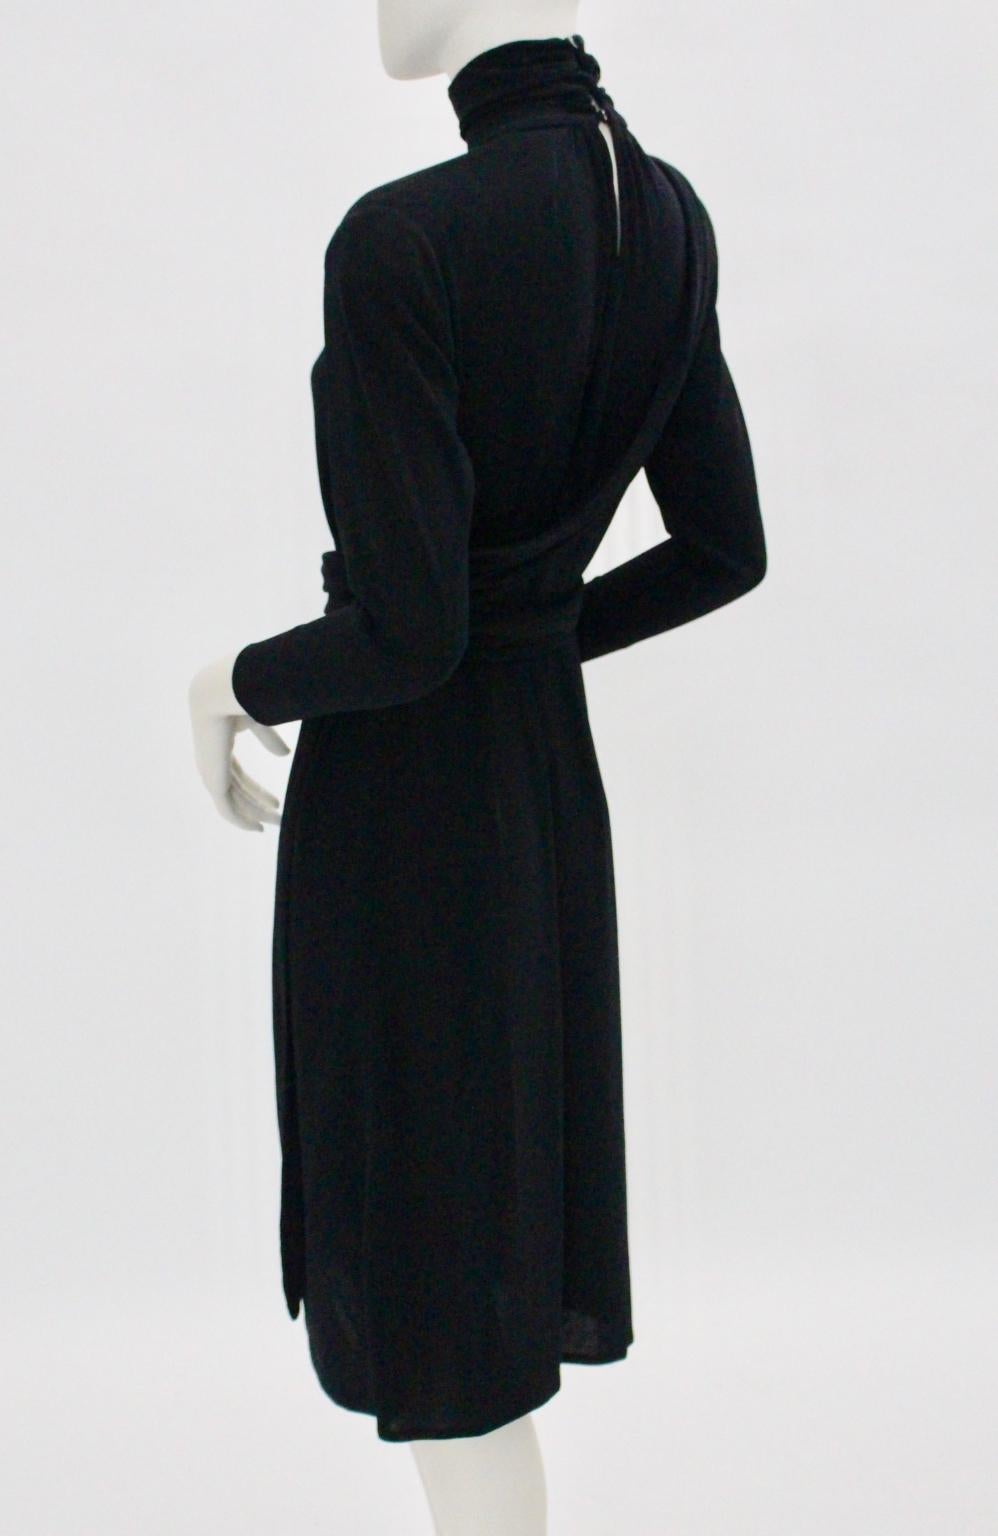 Black Vintage Wrap Evening Dress 1970s Italy For Sale 4